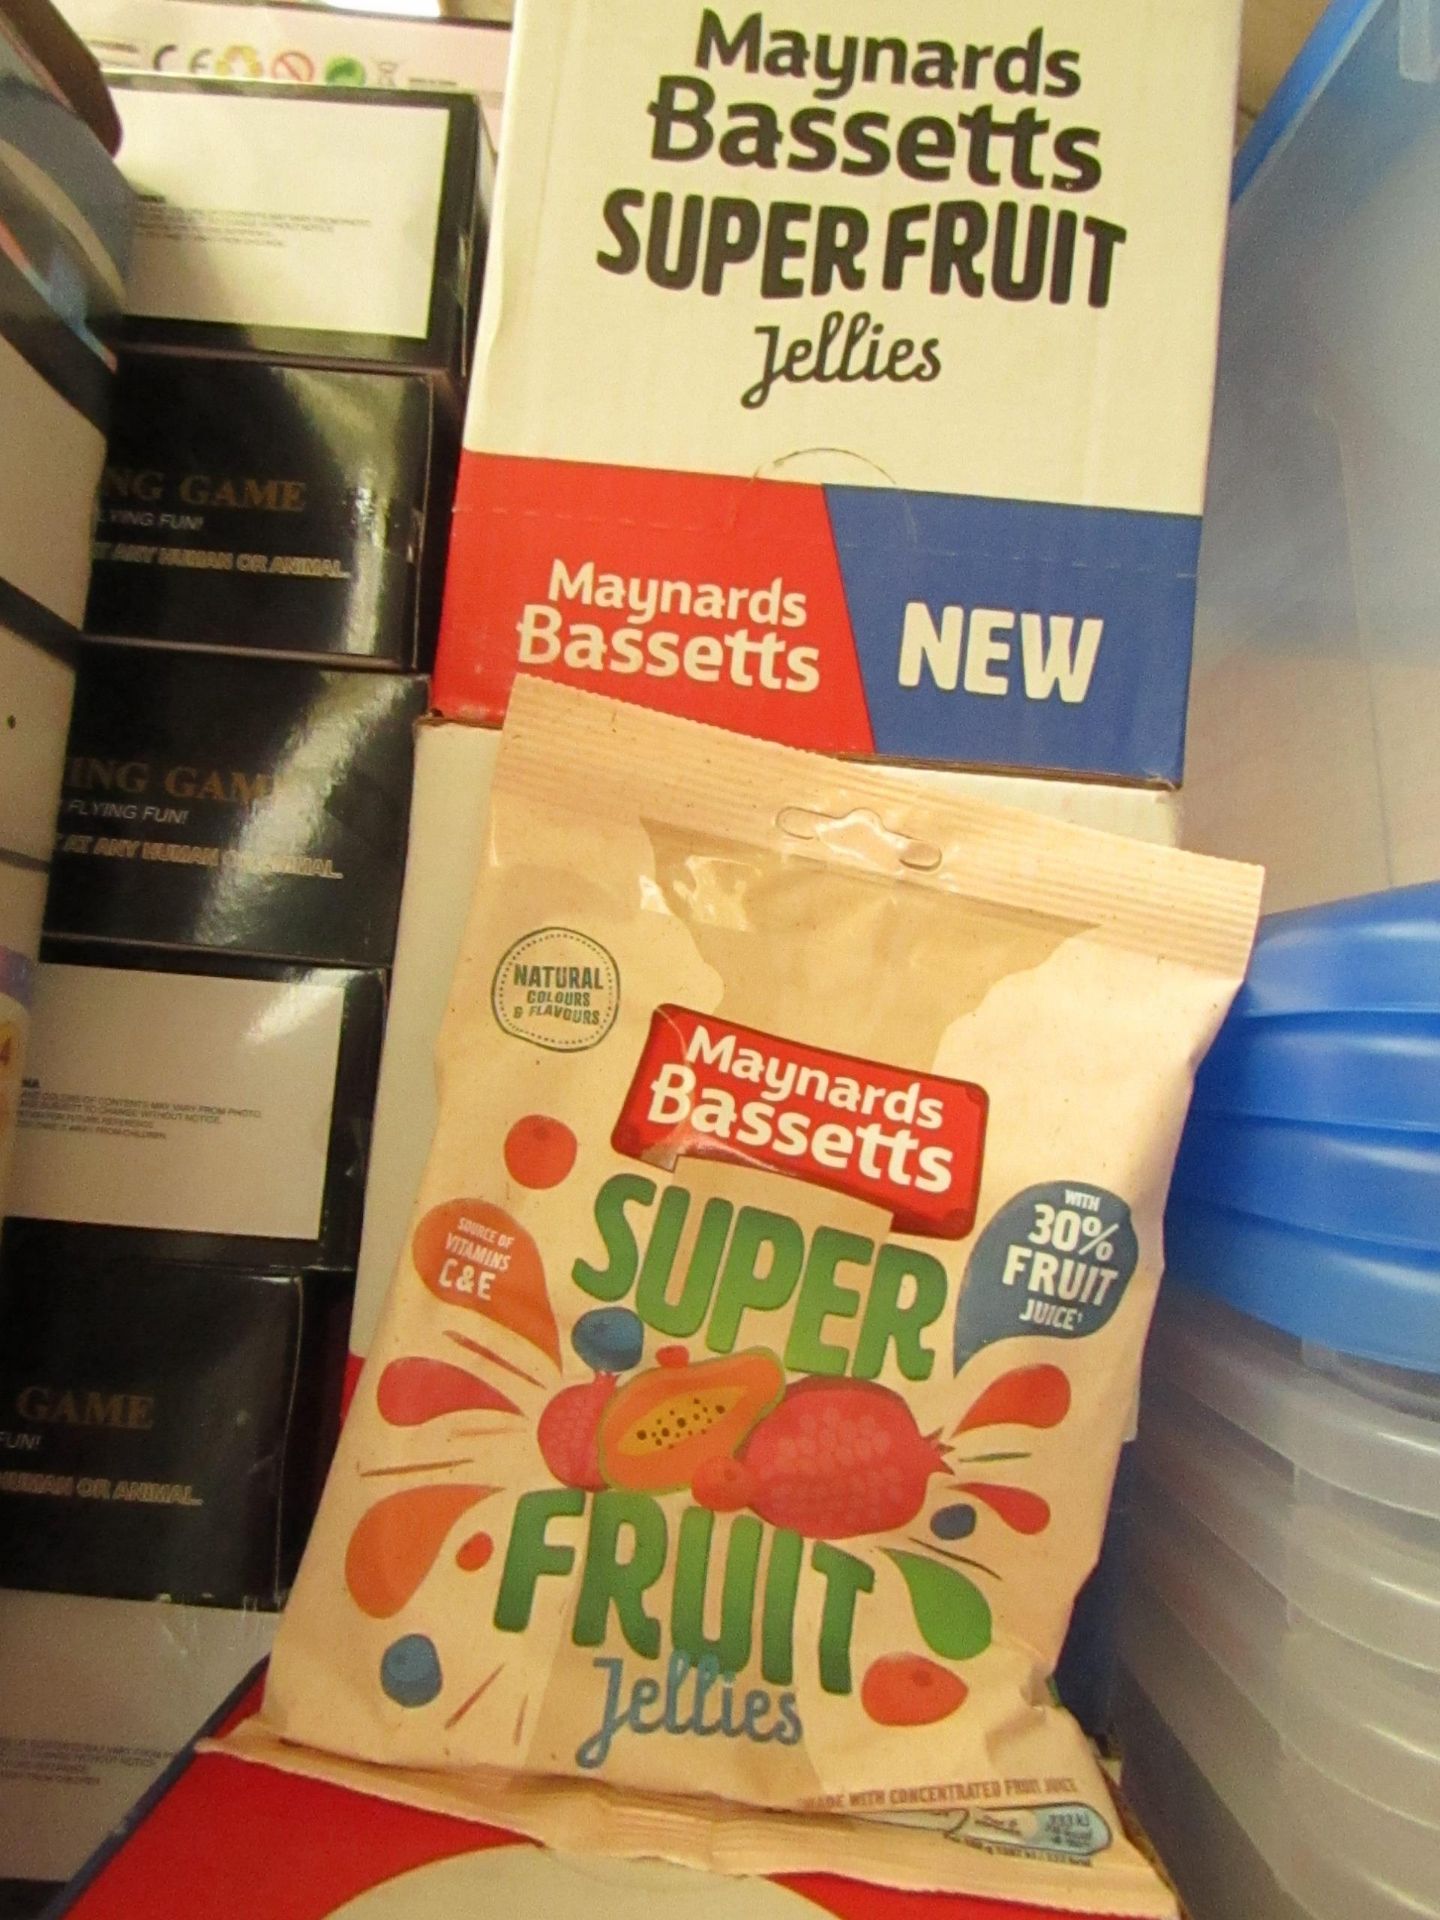 10x 130g Bags of Maynards Bassetts Super fruit jellies - New & Boxed - Best before 10/02/2021